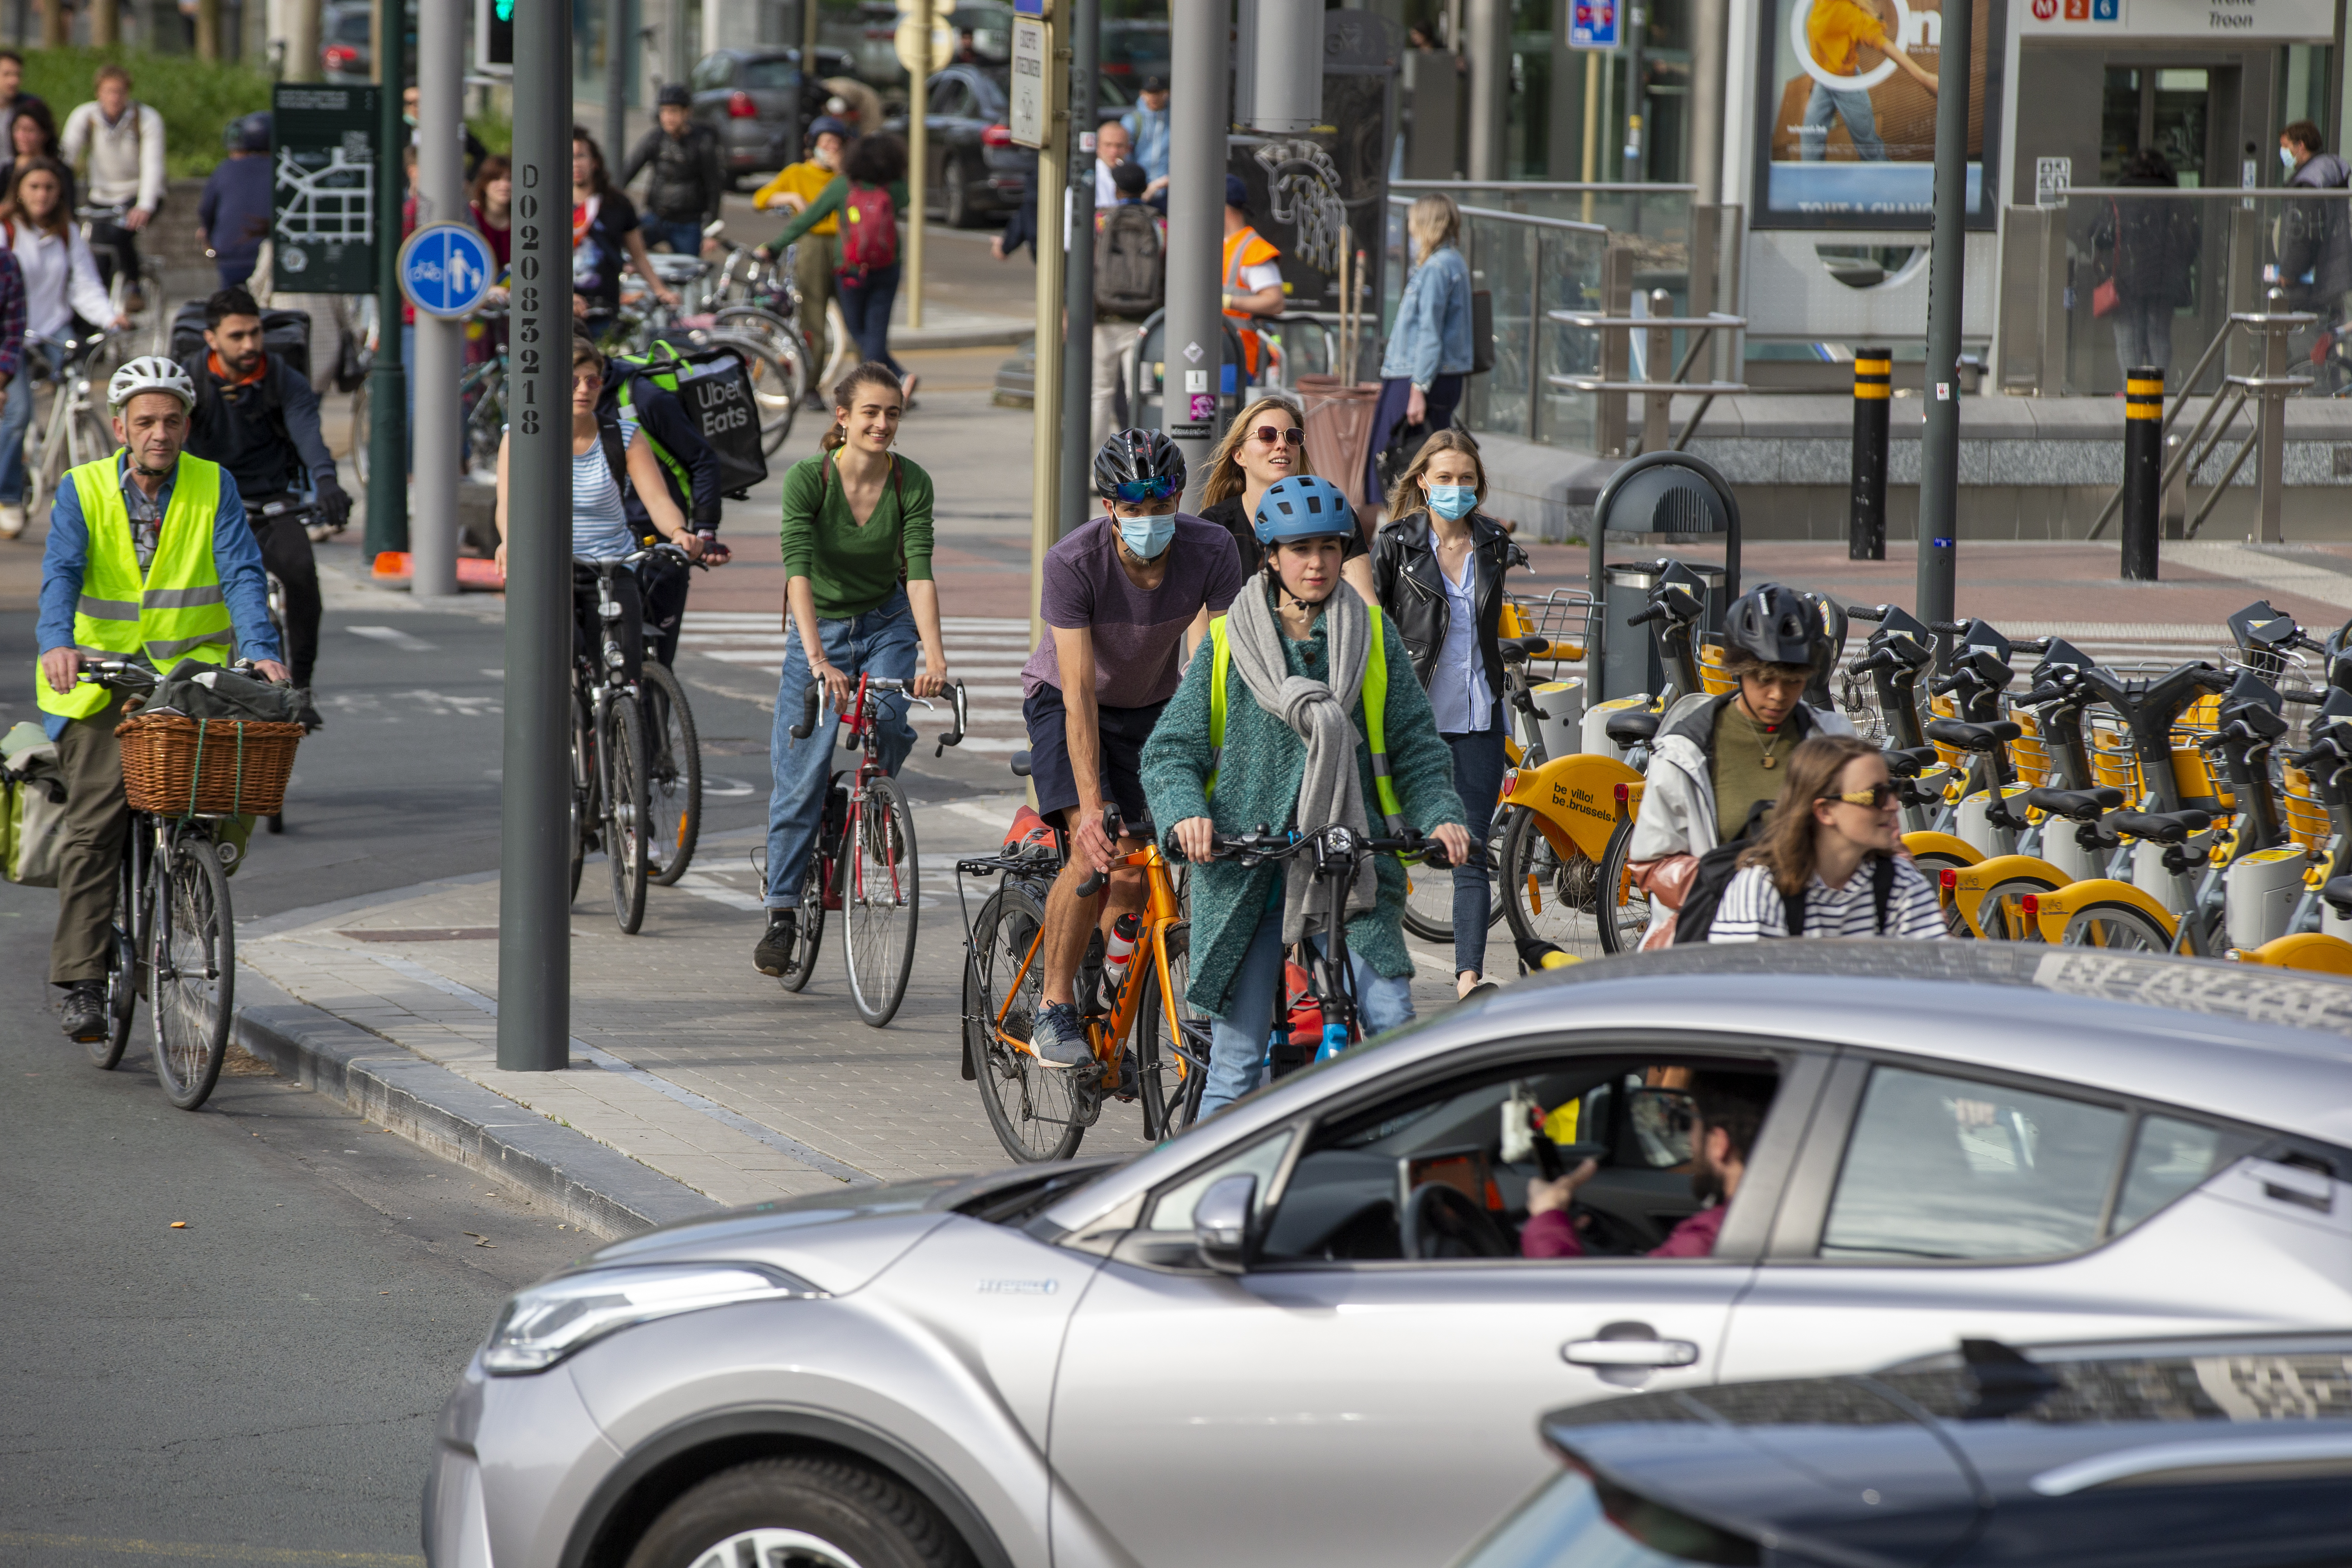 Brussels: Bicycle use continues to increase and diversify